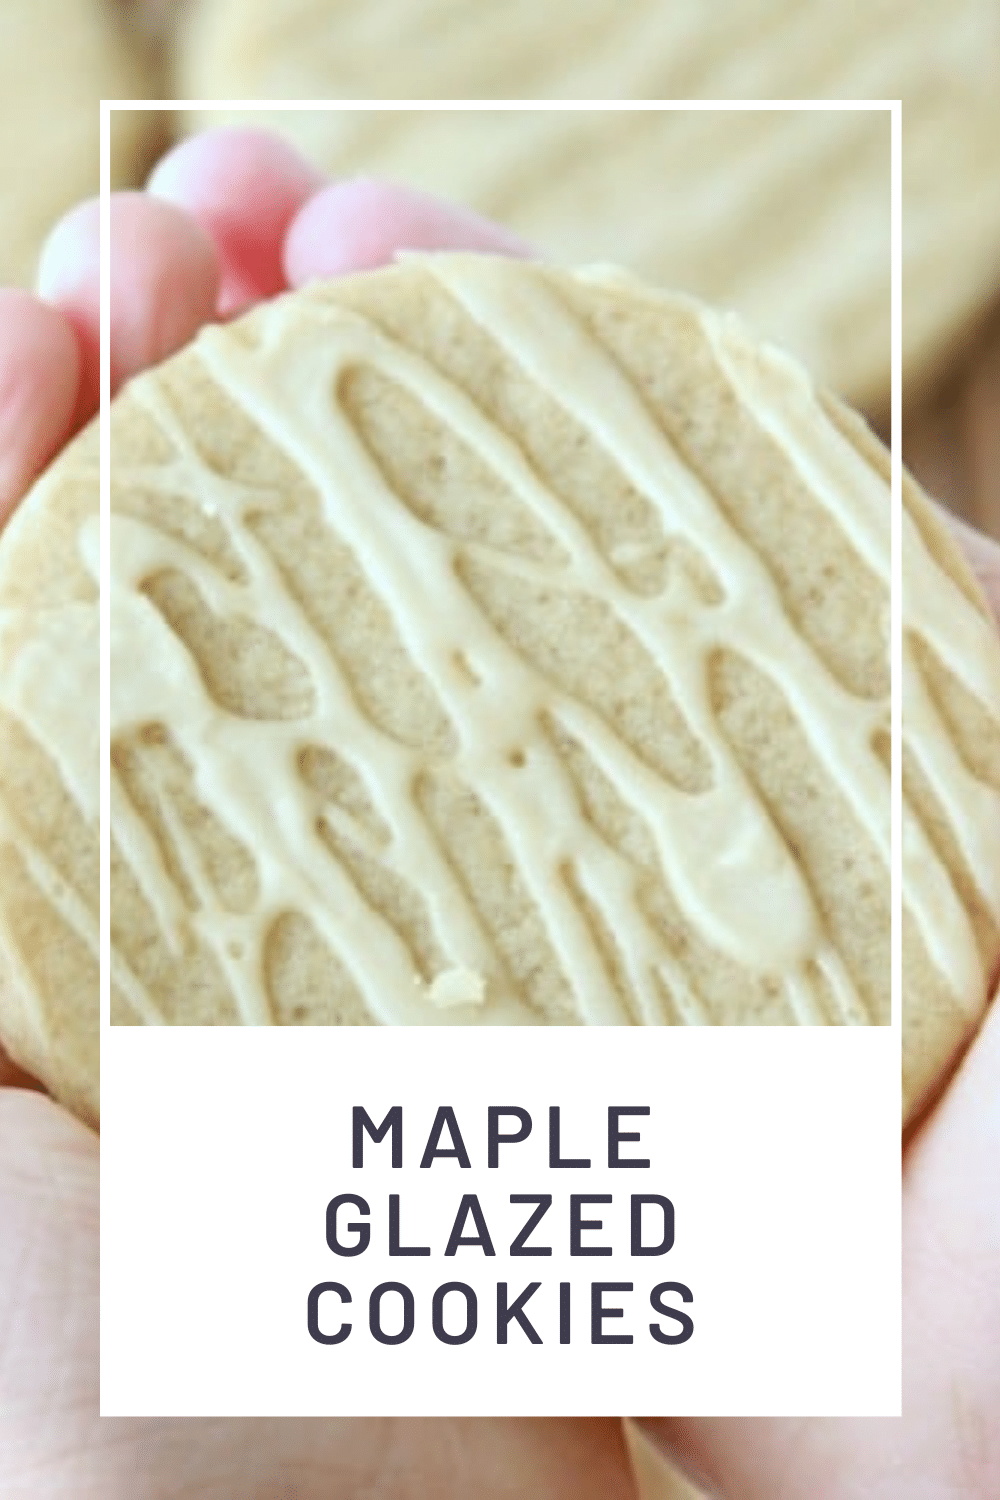 Maple sugar cookies are the perfect fall cookie recipe! A light drizzle of maple glaze is the perfect finish for these simple, delicious cookies! If you're looking for a unique and delicious cookie recipe, you're going to love these! via @somewhatsimple